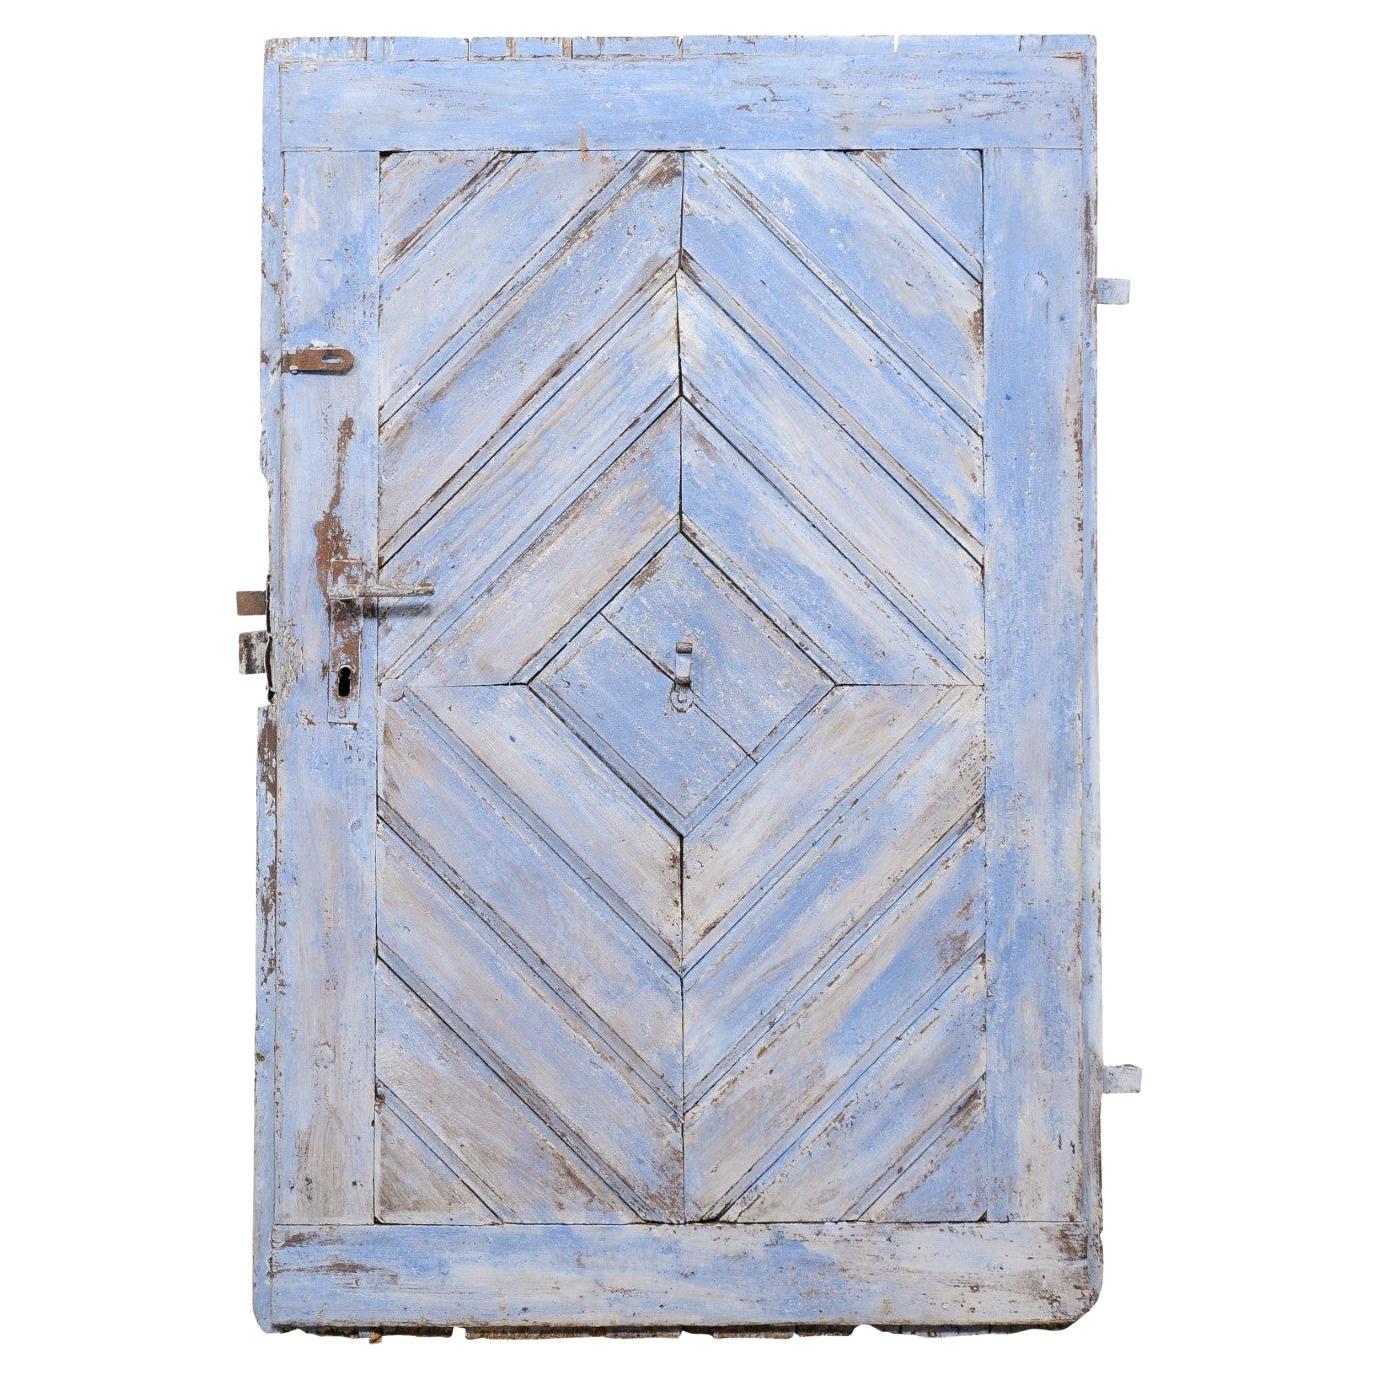 Spanish 19th C. Diamond Pattern Painted Wood Door 'Could be a Great Headboard' For Sale